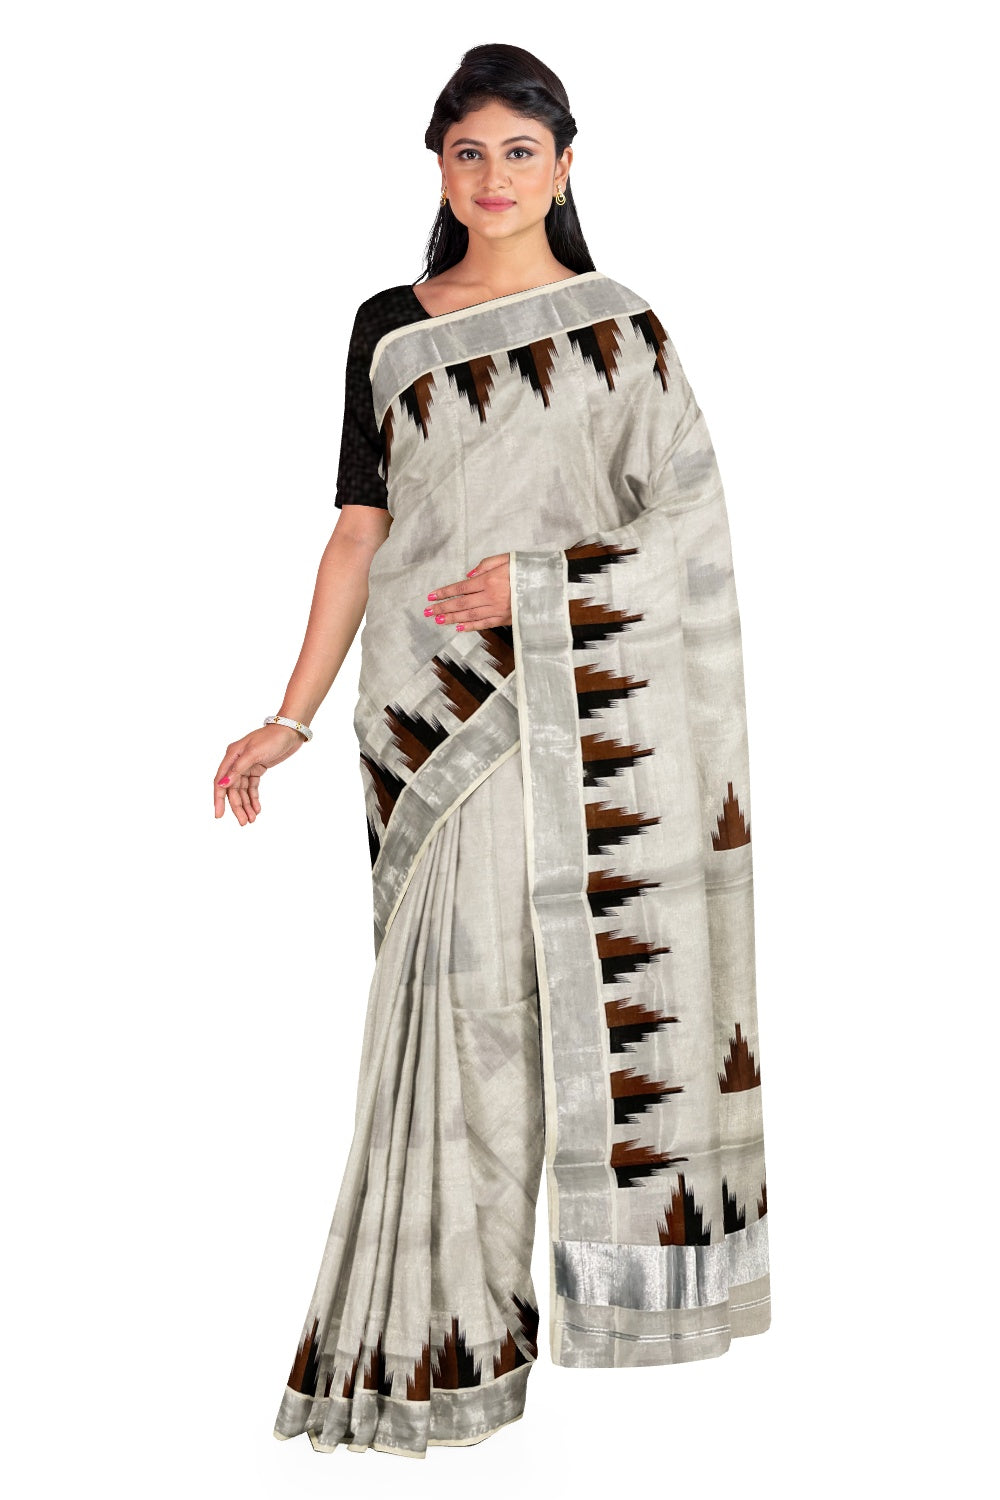 Kerala Silver Tissue Saree with Black and Brown Temple Print